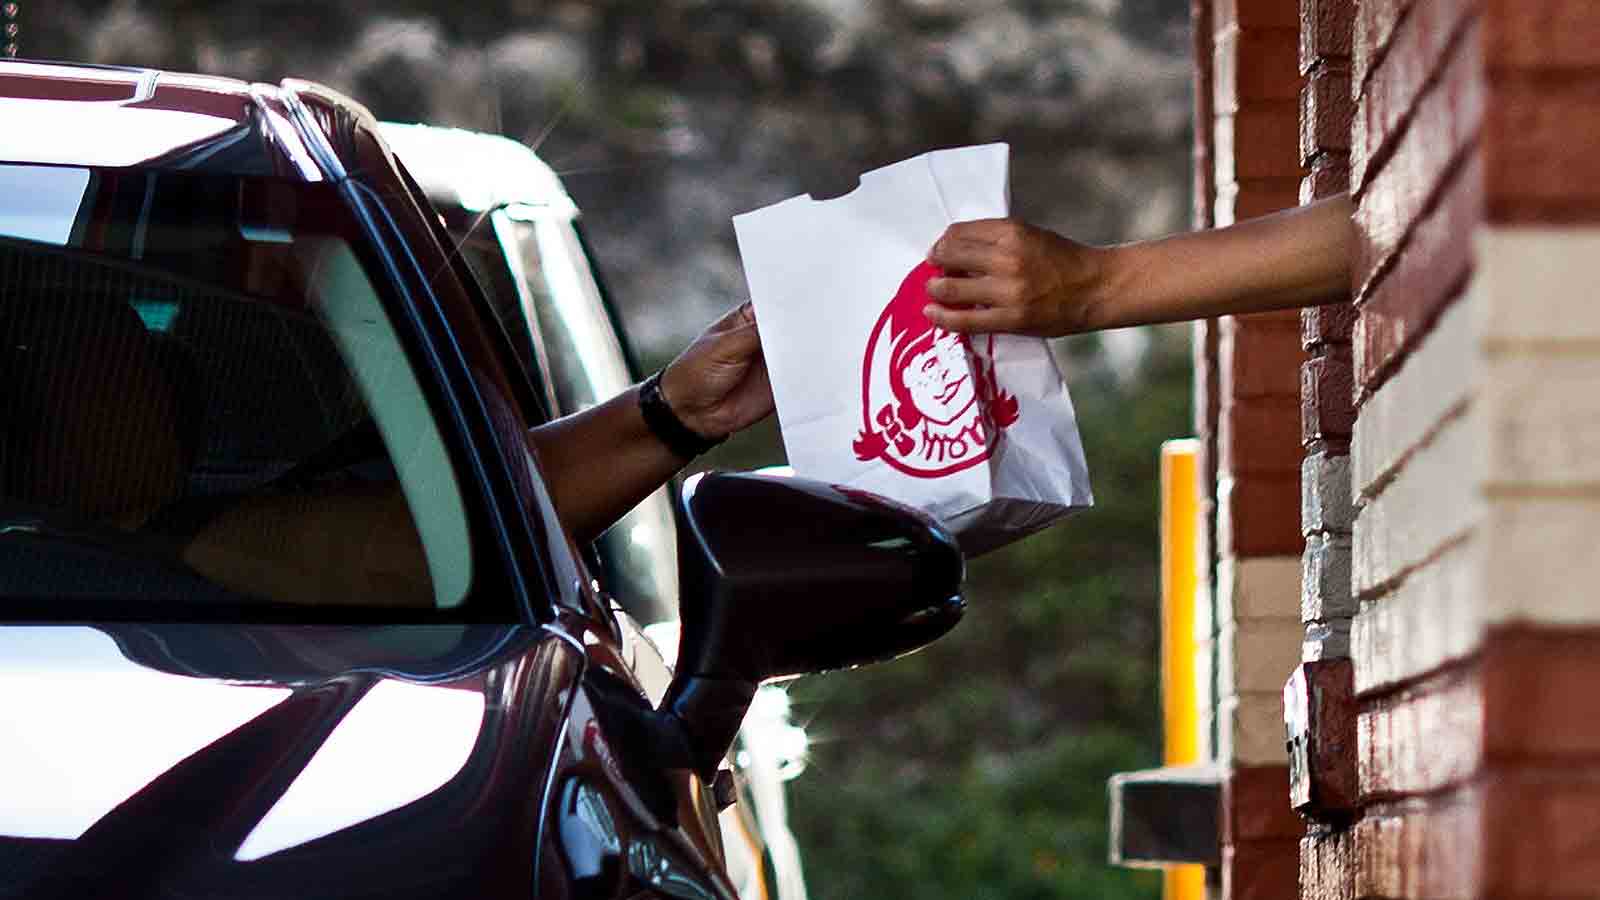 Panera Expands Its Digital Ordering Options with Drive-Thru Pick-Up